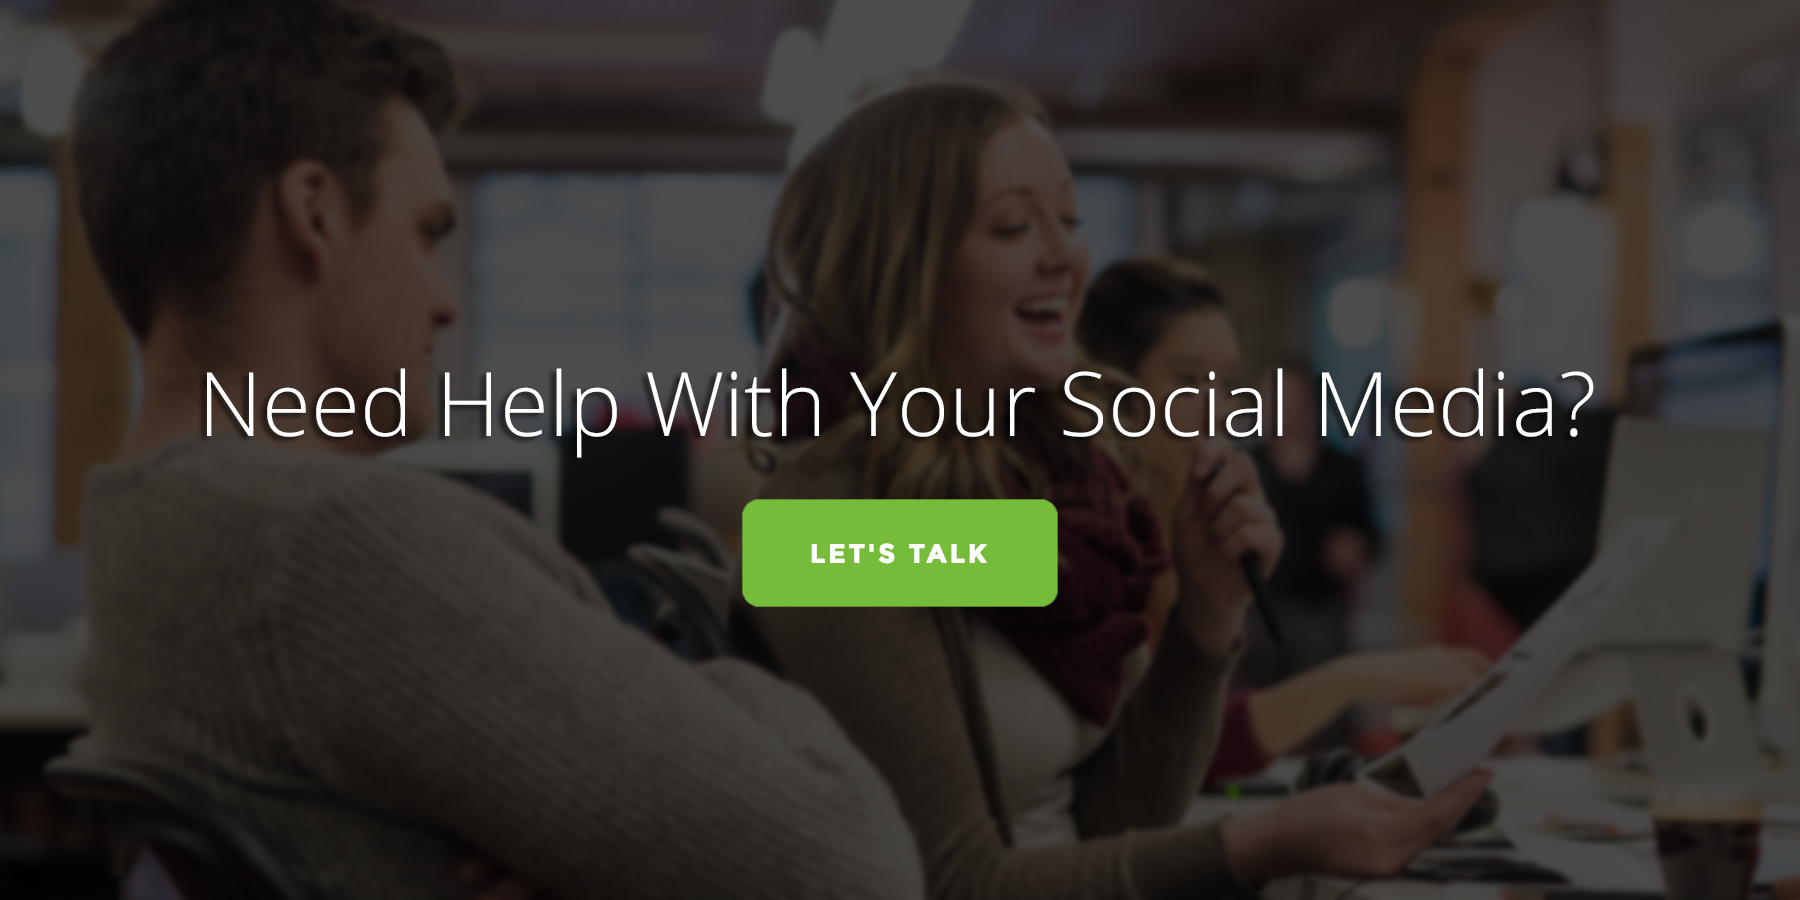 Need Help With Your Social Media?